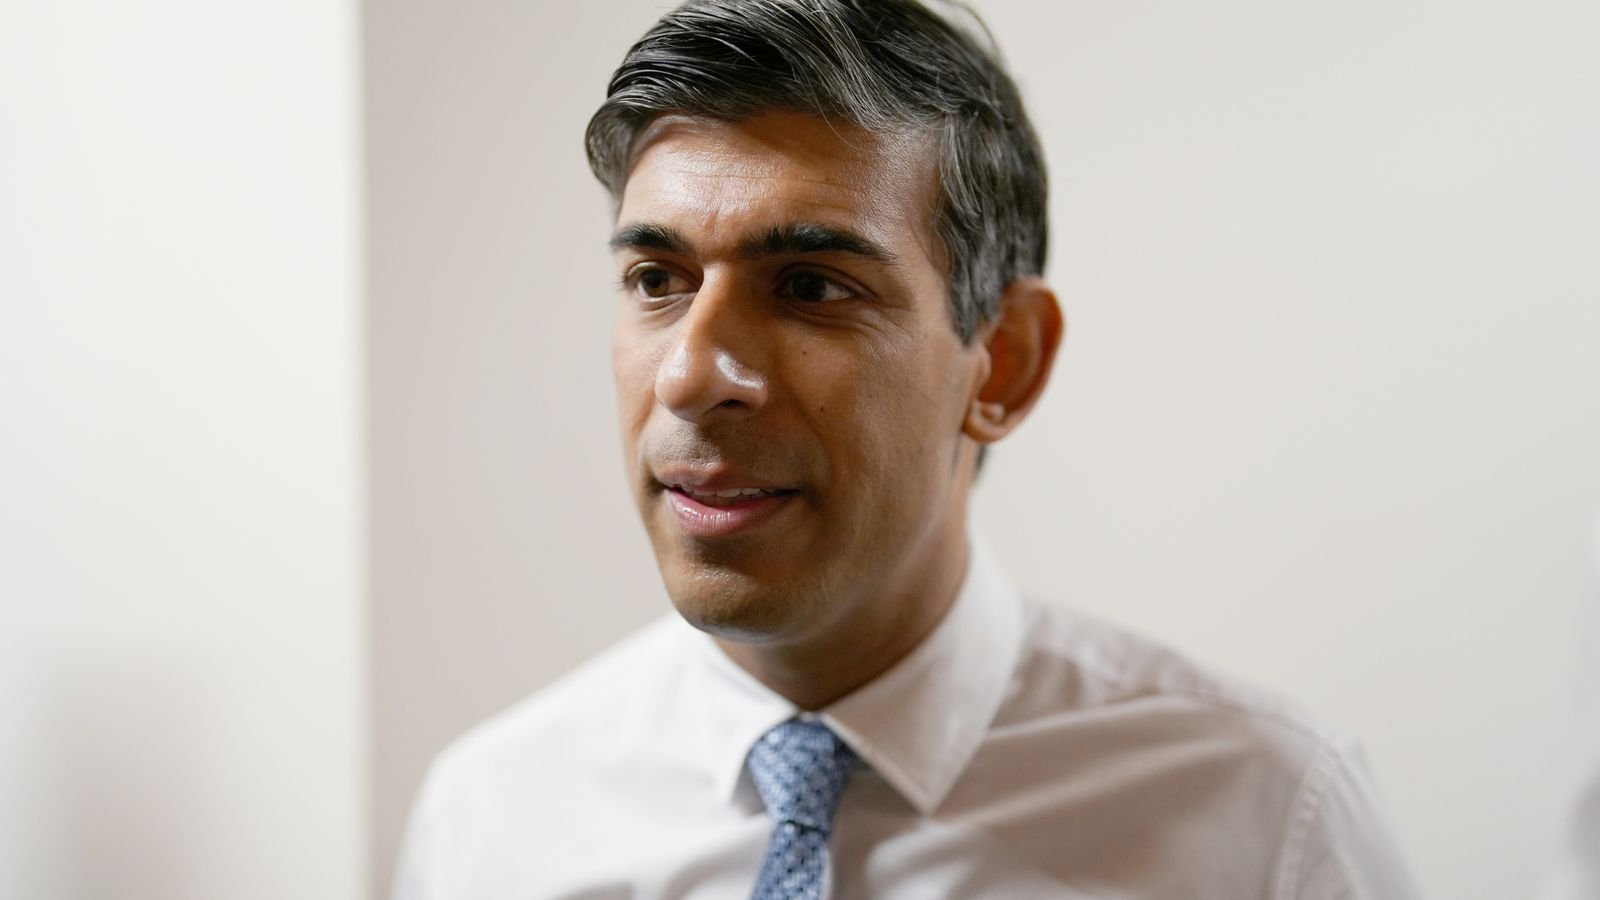 Rishi Sunak hints at blocking public sector pay rises as he attacks 'completely unreasonable' doctors' strikes